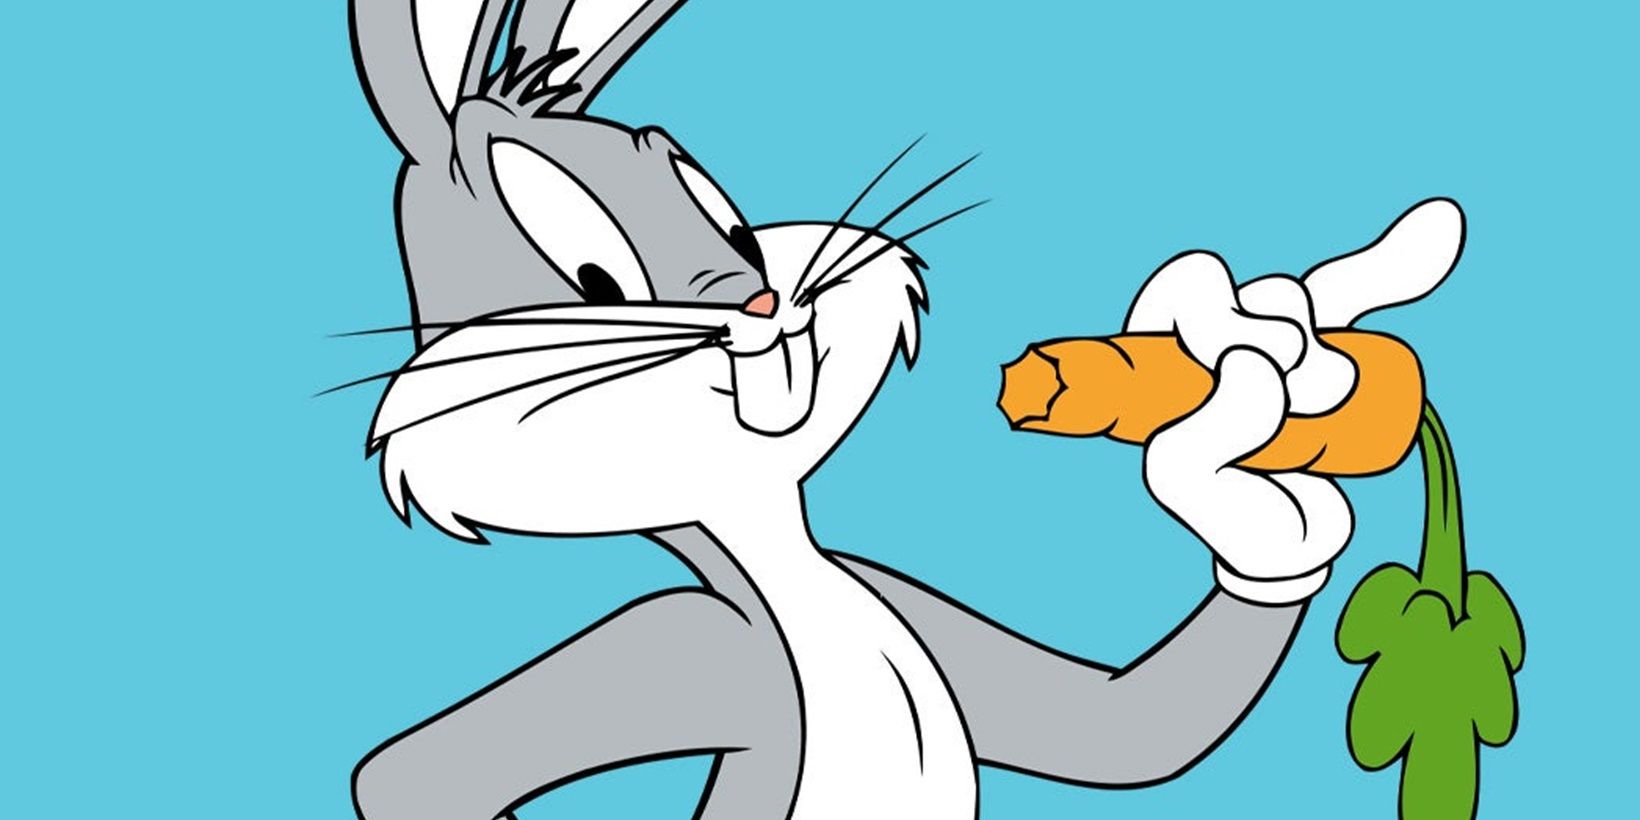 Bugs Bunny eating a carrot